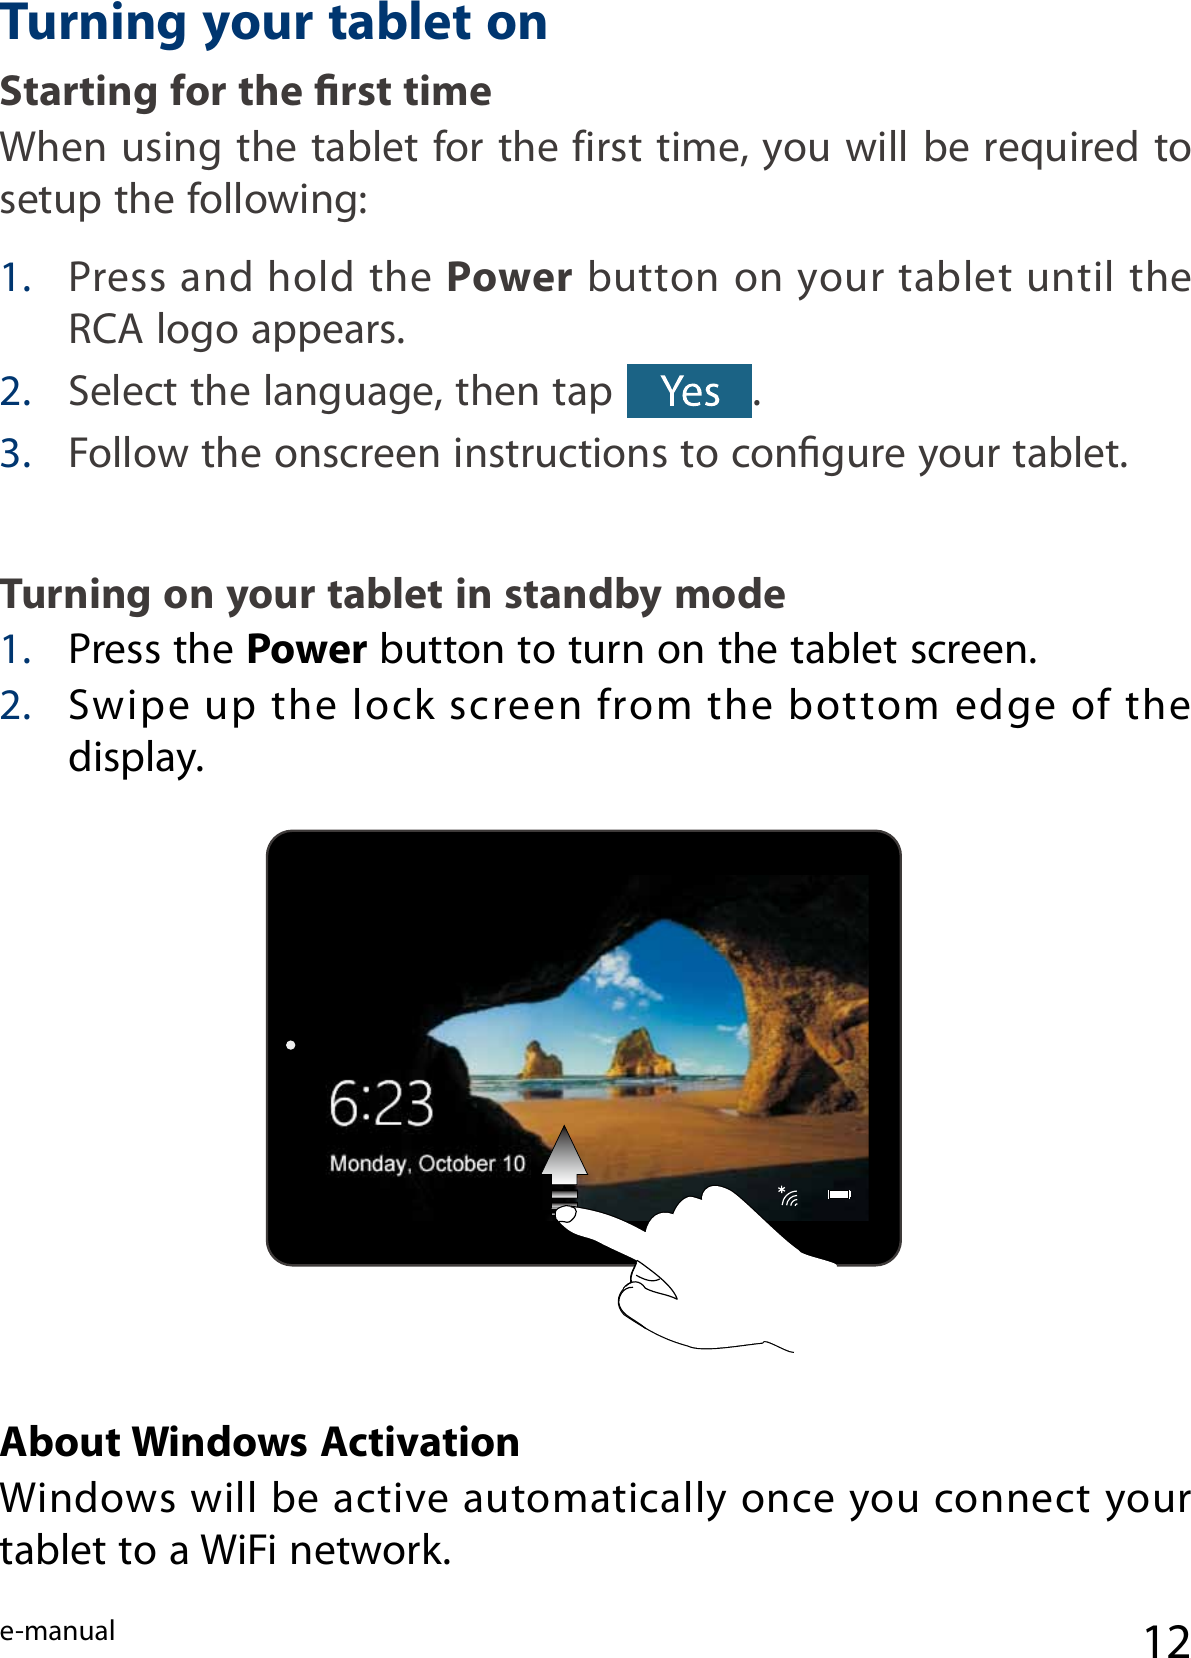 e-manual 121. Press and hold the Power button on your tablet until the RCA logo appears.2. Select the language, then tap  .3. Follow the onscreen instructions to congure your tablet. Turning on your tablet in standby mode 1.  Press the Power button to turn on the tablet screen.2. Swipe up  the  lock screen from  the  bottom  edge  of the display.About Windows Activation Windows will be active automatically once you connect your tablet to a WiFi network.Turning your tablet onStarting for the rst time When using the tablet for the first time, you will be required to setup the following:  